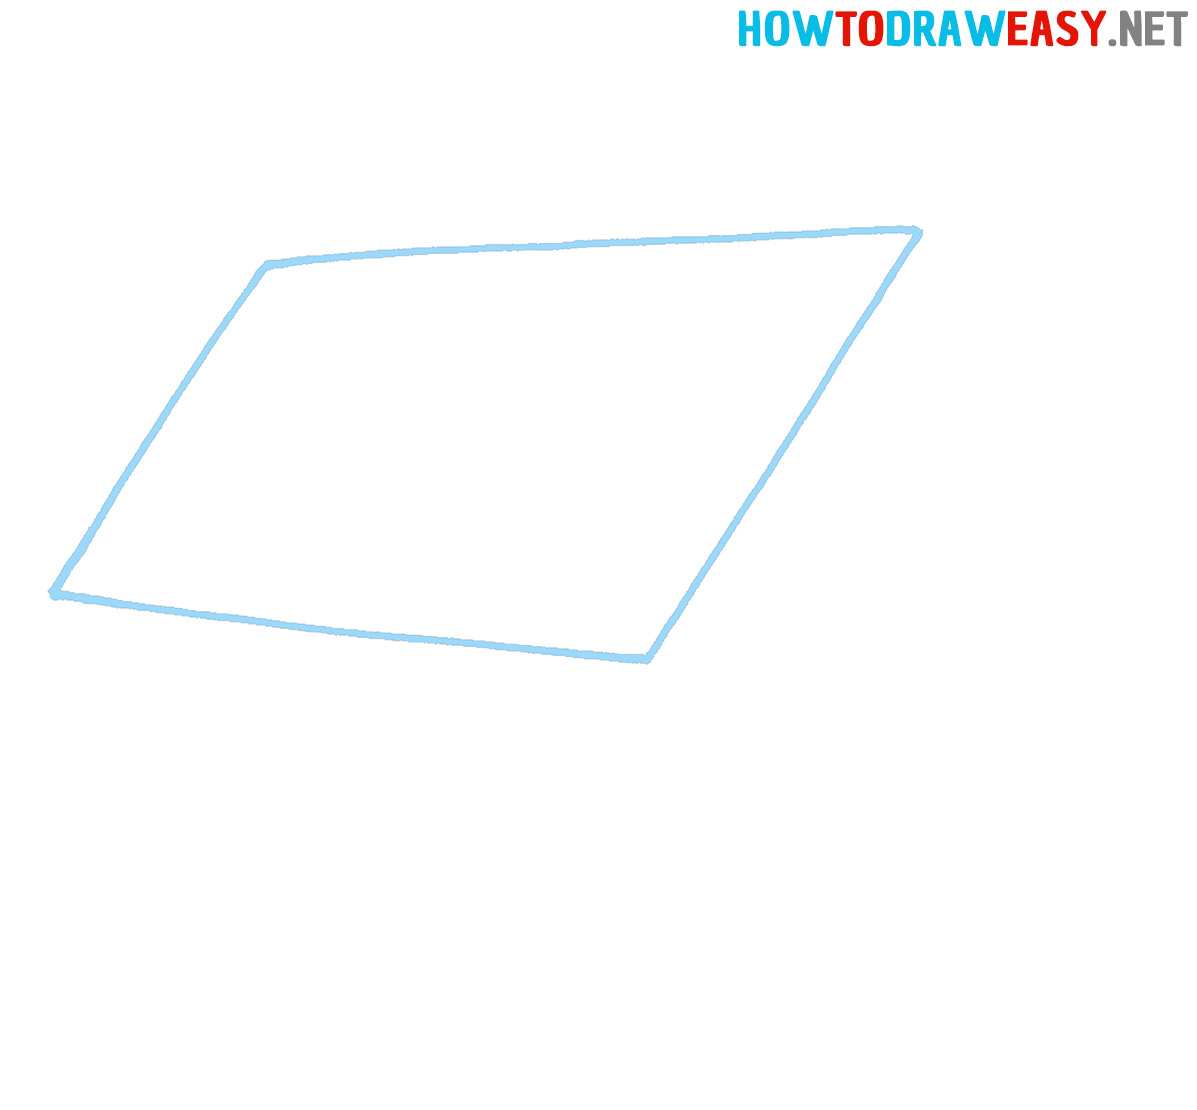 How to Sketch a House